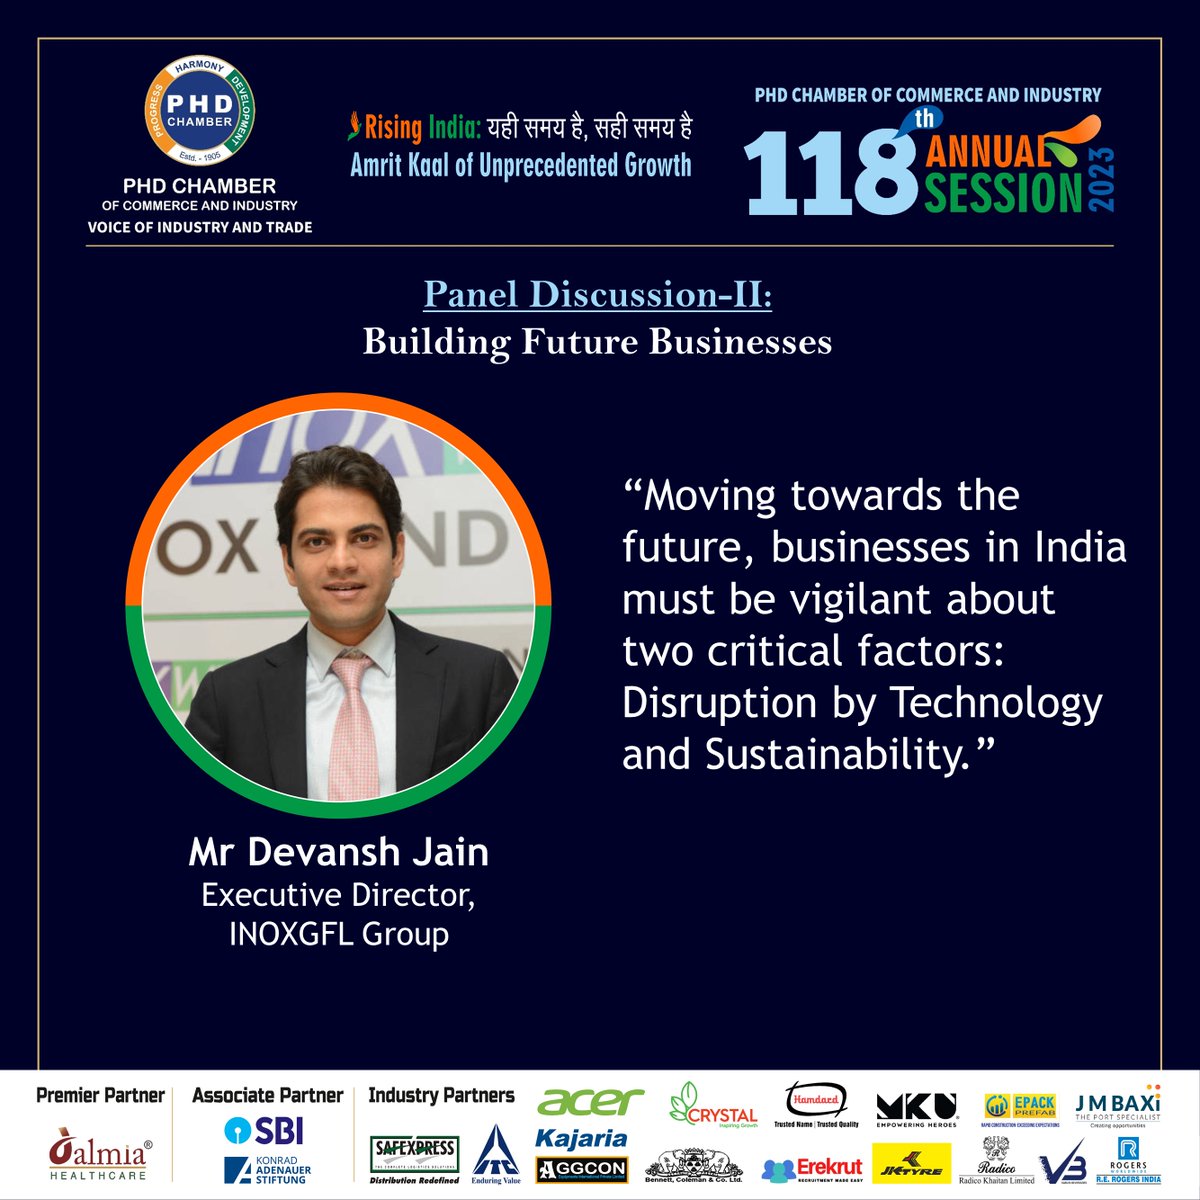 Mr. Devansh Jain, Executive Director of INOXGFL Group, shares invaluable insights as a panelist at the 118th Annual Session 2023 themed: 'Rising India: 'यही समय है, सही समय है', Amrit Kaal of Unprecedented Growth'

#PHDCCI #AGM #PHDCCI118AGM #RisingIndia #AmritKaal